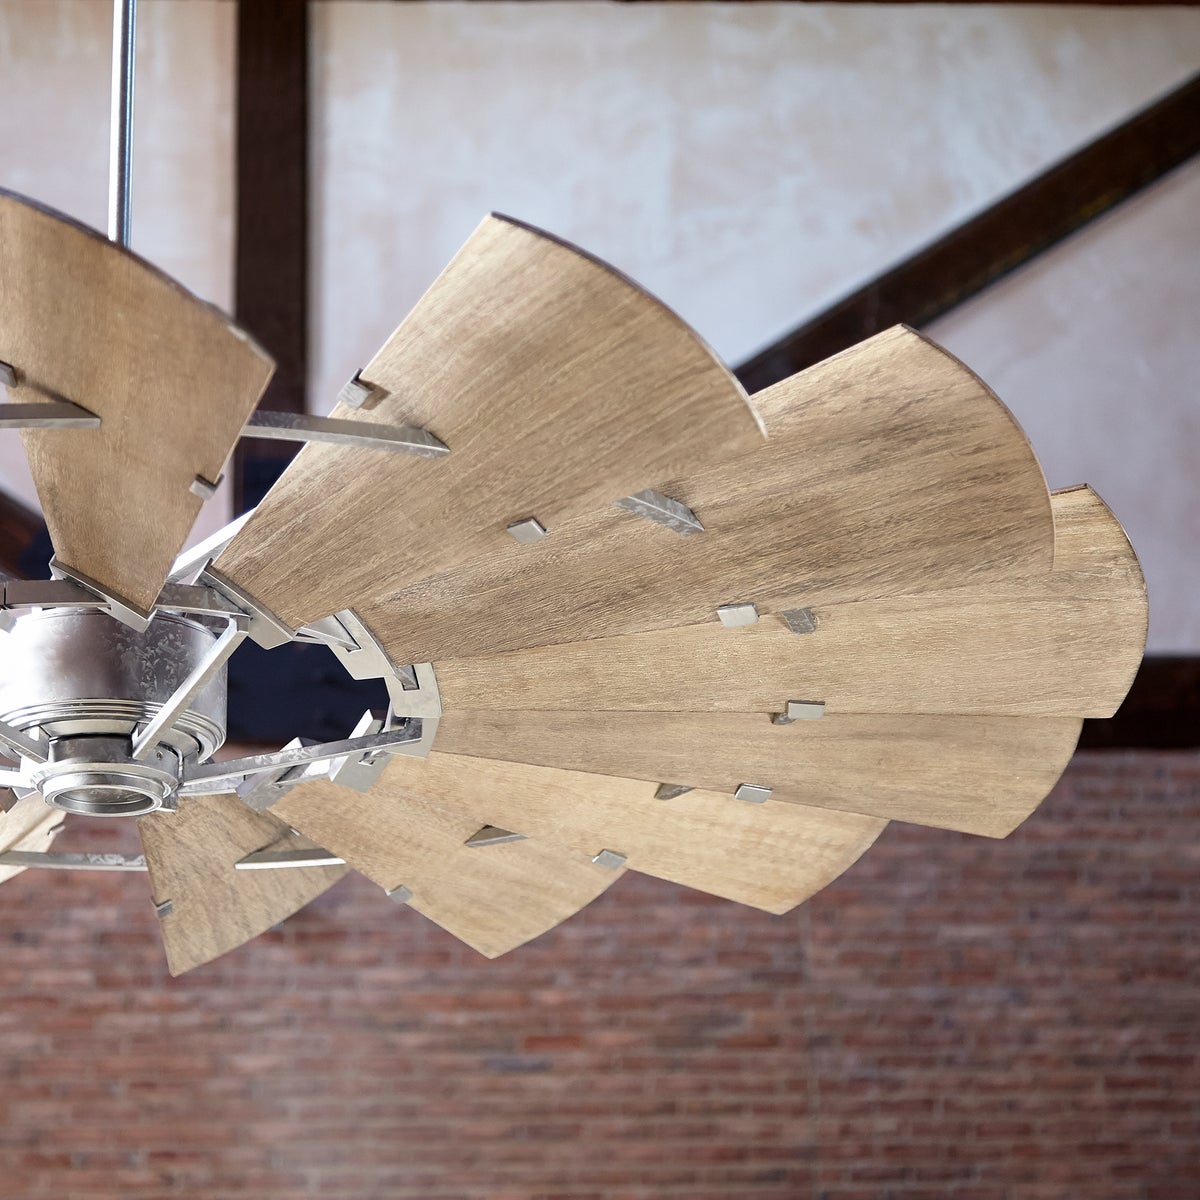 Farmhouse Ceiling Fan with weathered oak wooden blades, 15 blades, 30° pitch. Rustic design reminiscent of an outdoor windmill. DC-165L motor, UL Listed, Dry Location. Dimensions: 16.5"H x 72"W. Limited Lifetime warranty.